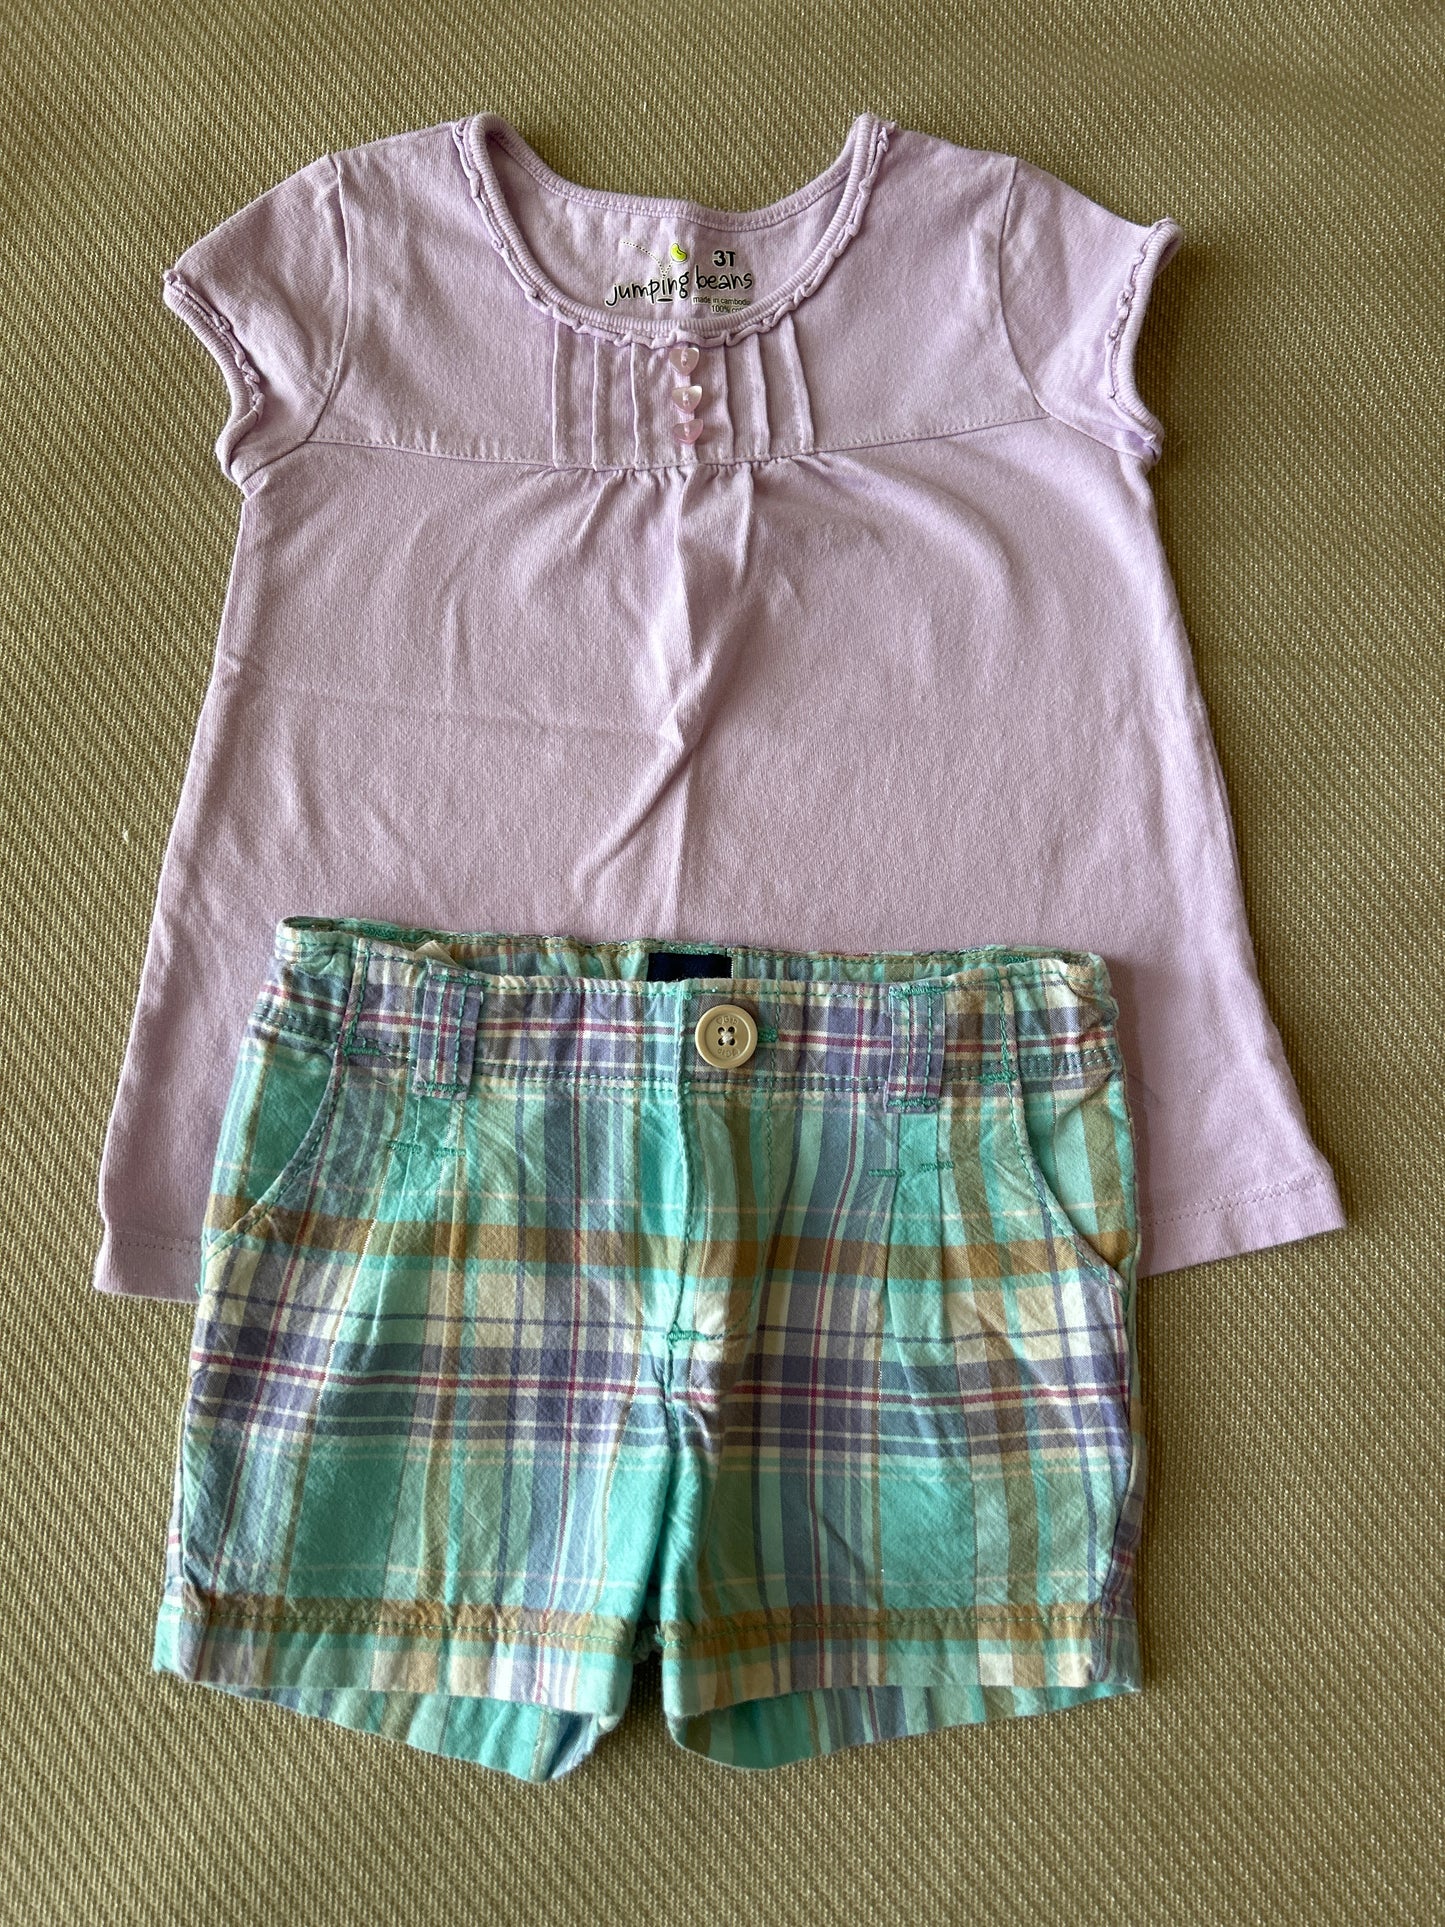 Girls 3T Outfit